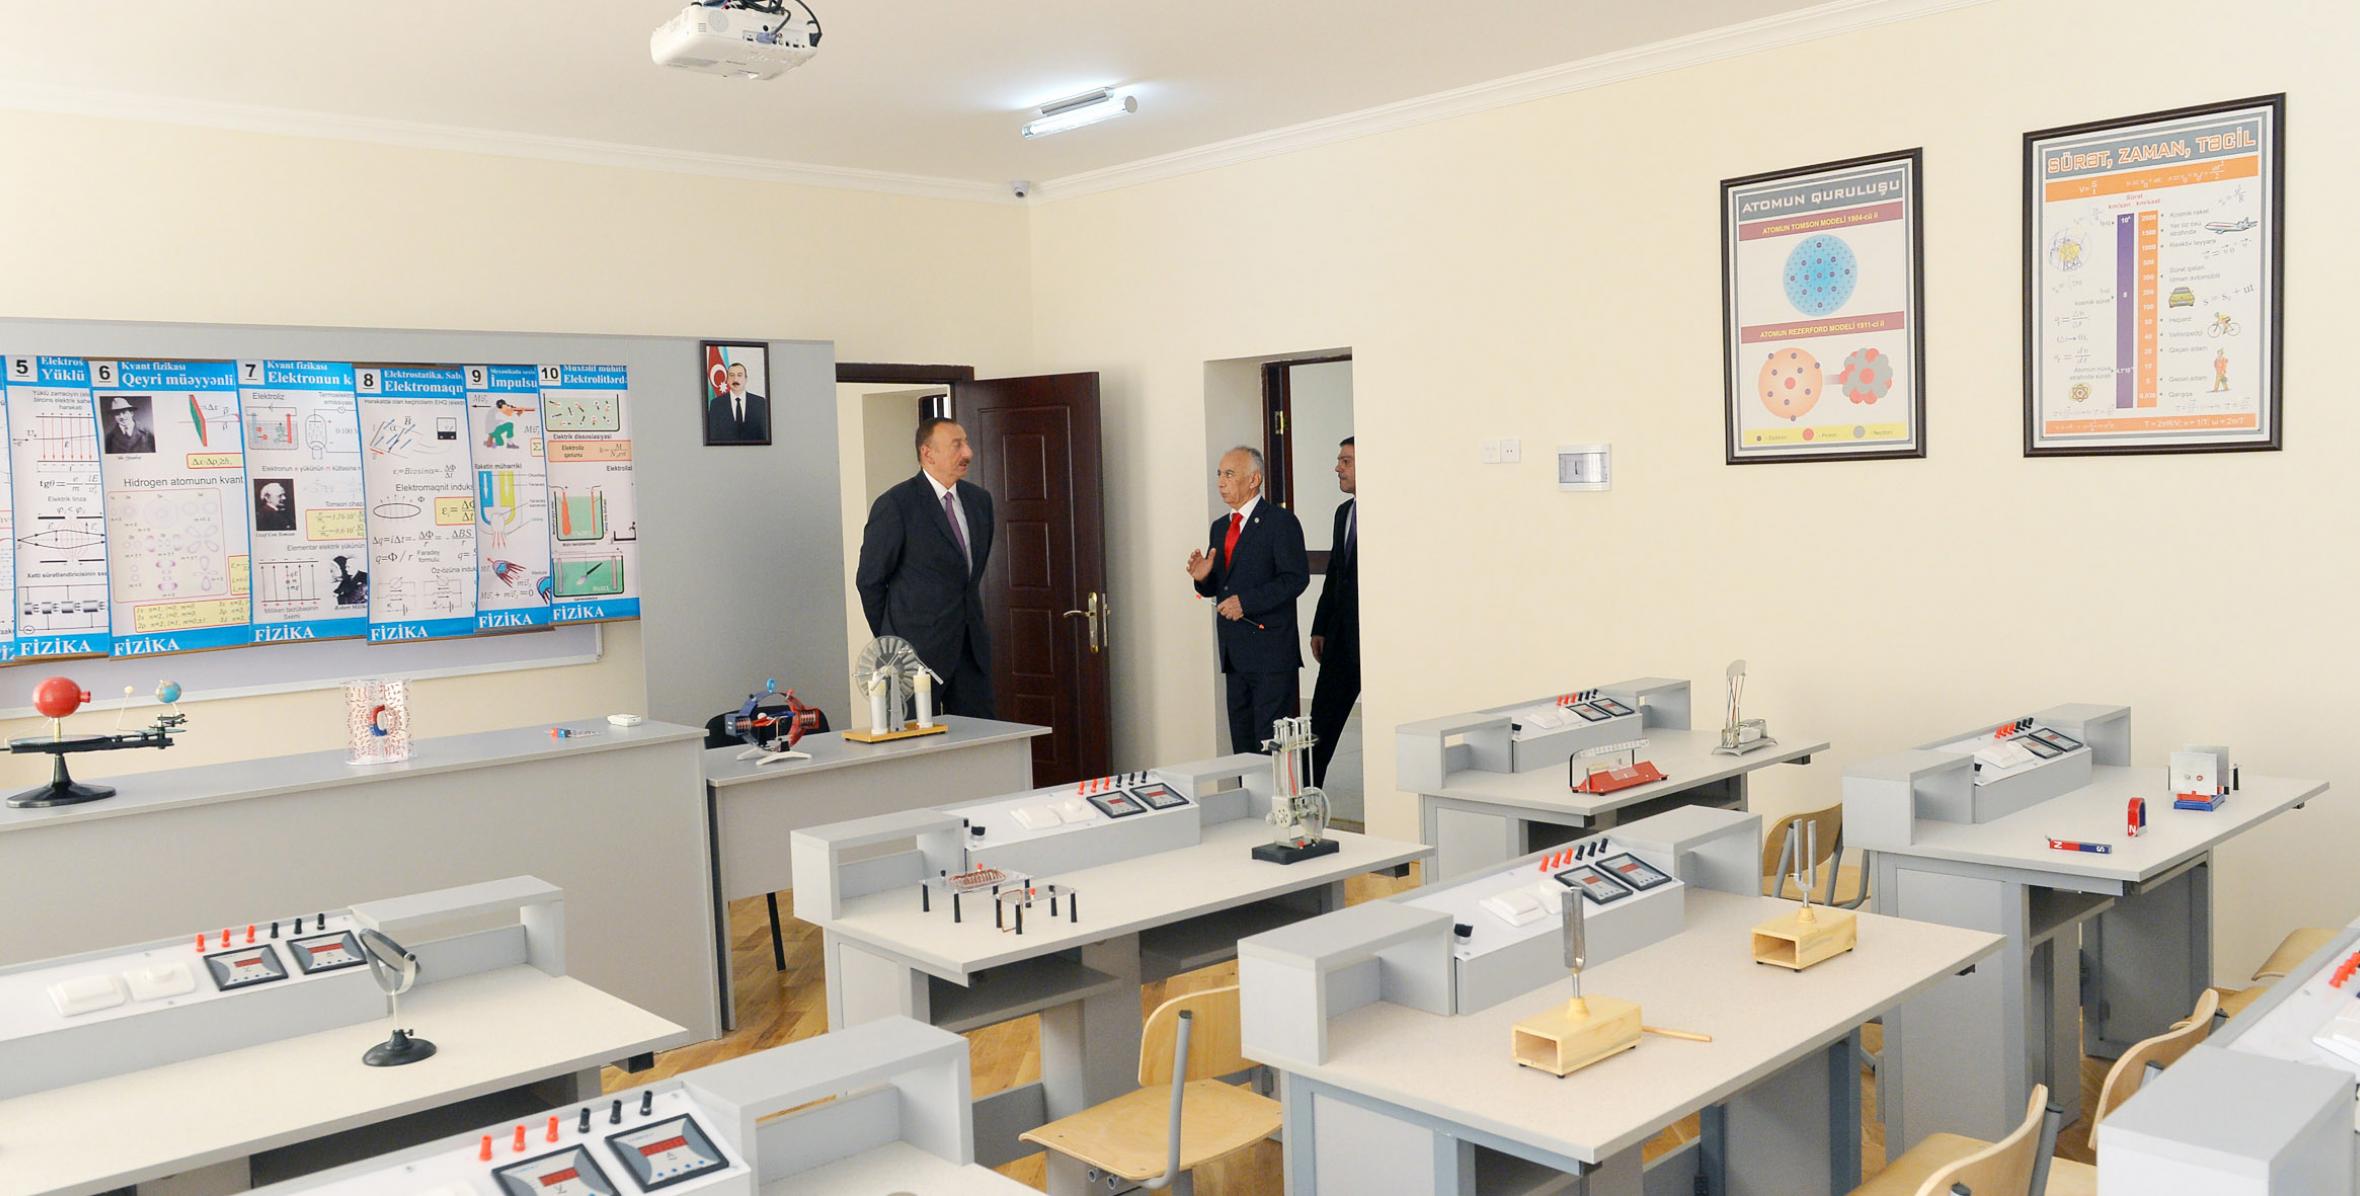 Ilham Aliyev reviewed secondary school No. 115 in Binagadi District after major repair and reconstruction